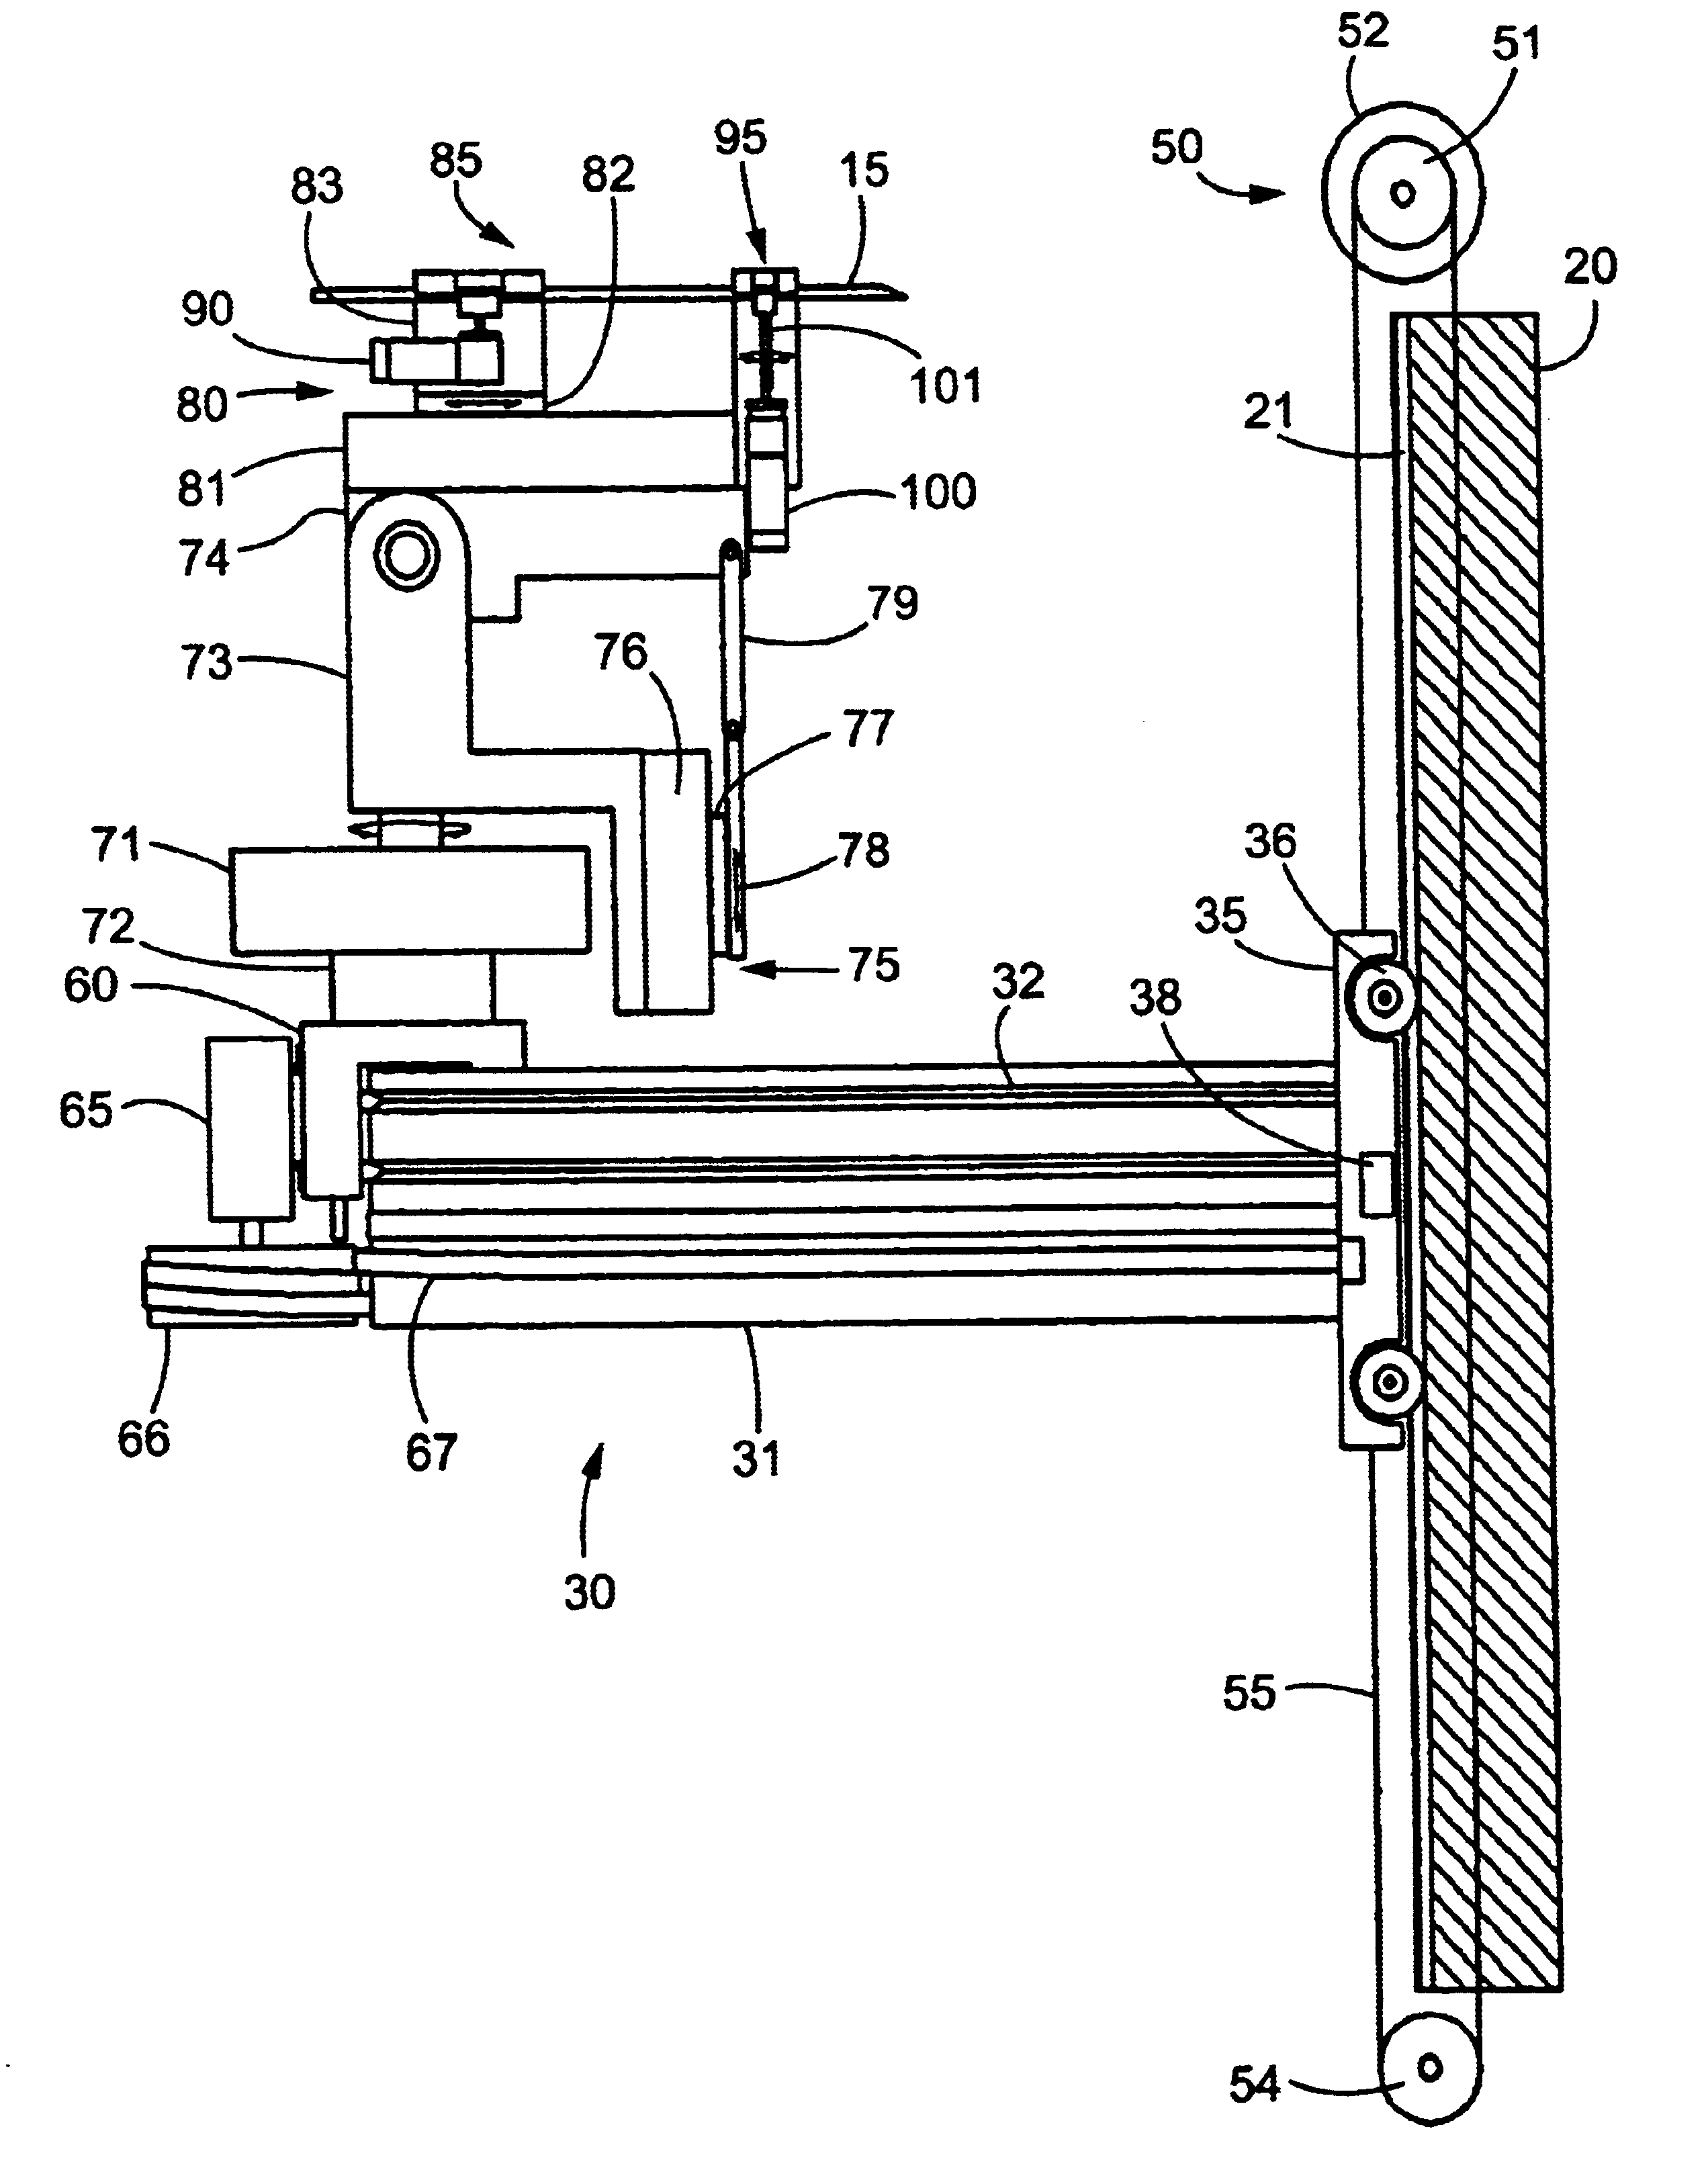 Medical manipulator for use with an imaging device